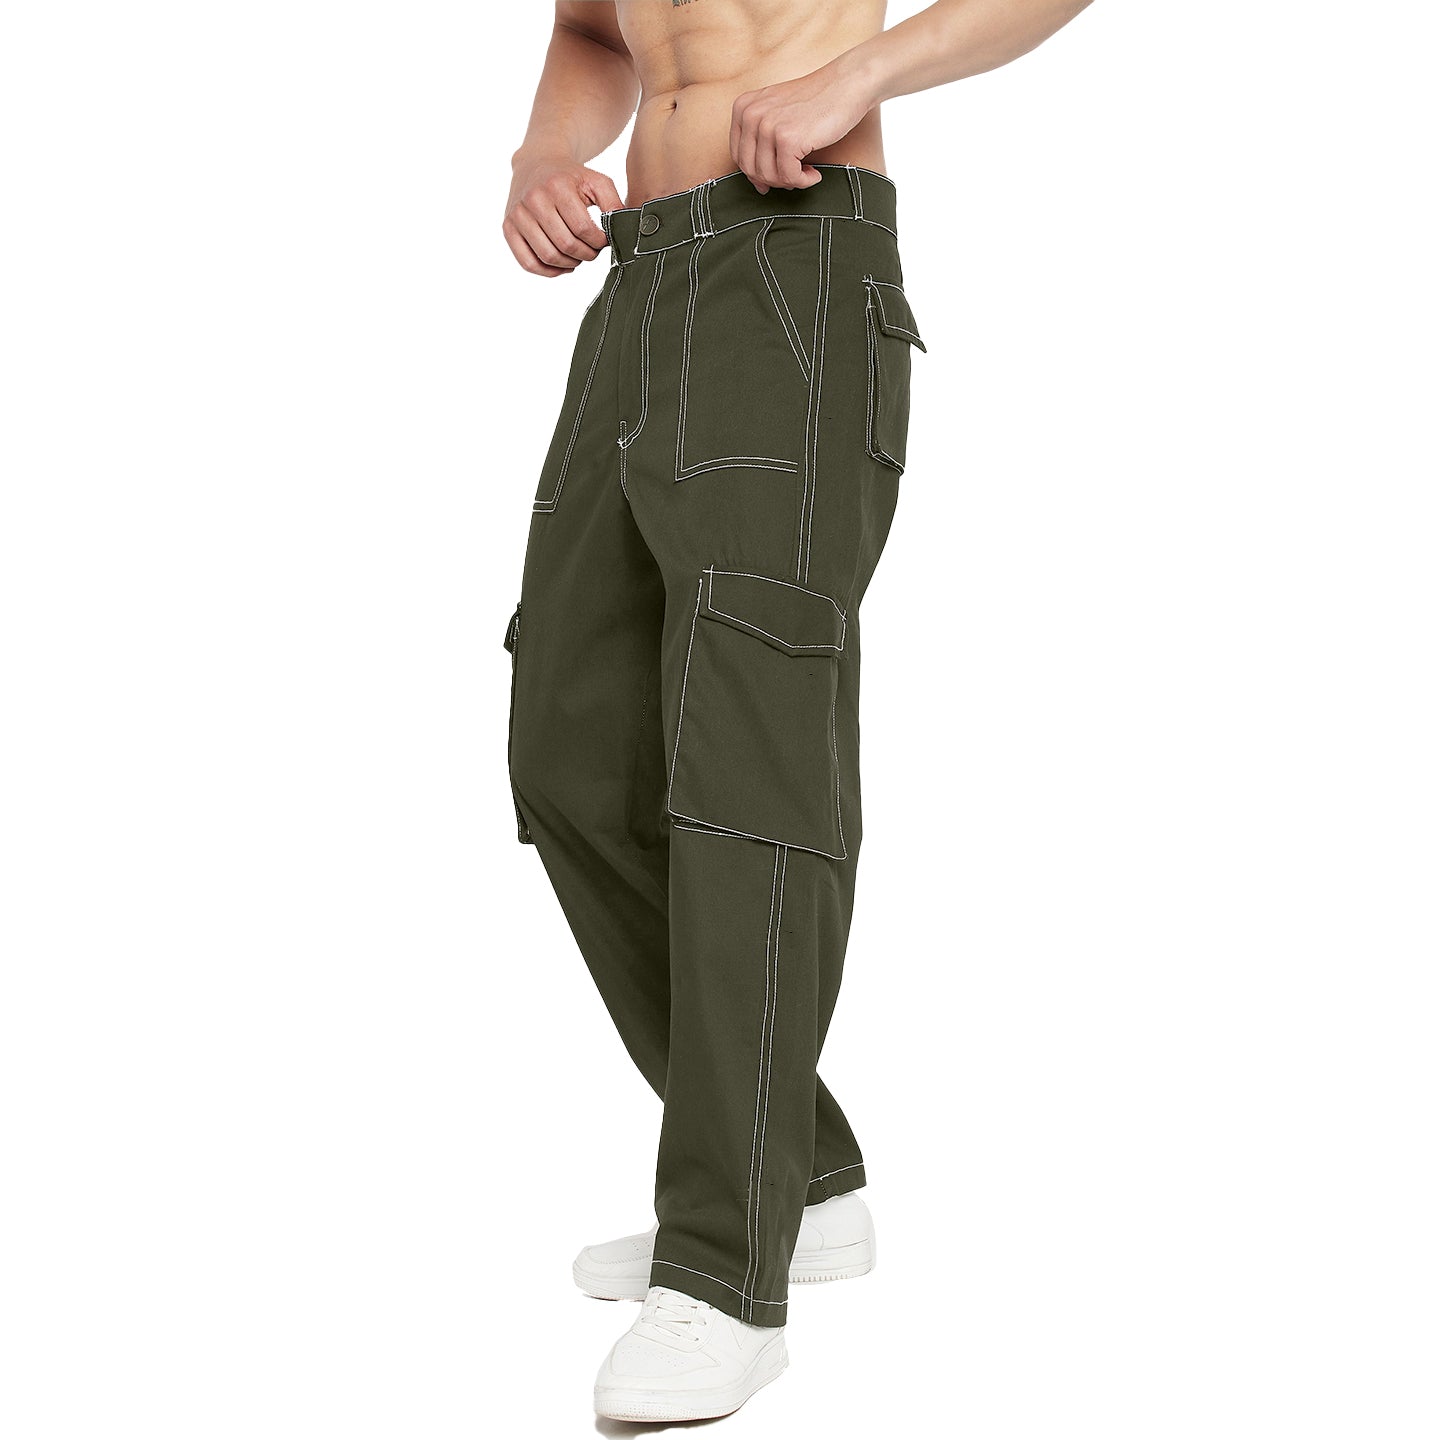 EMMERSON PANT - OLIVE | Green cargo pants outfit, Outfit men streetwear, Cargo  pants outfit men